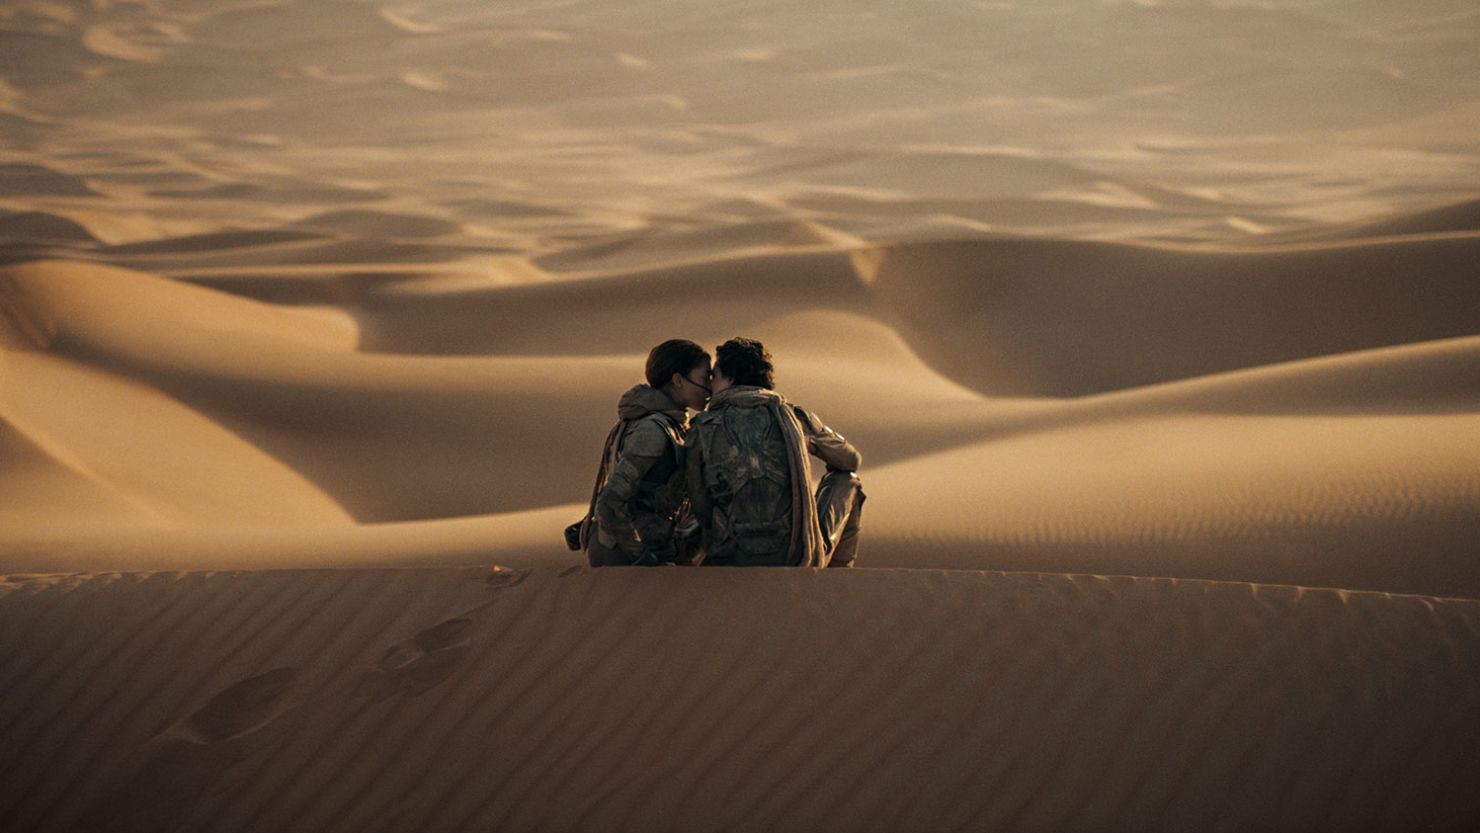 Denis Veillenuev has always taken risks from his first film to Dune: Part Two